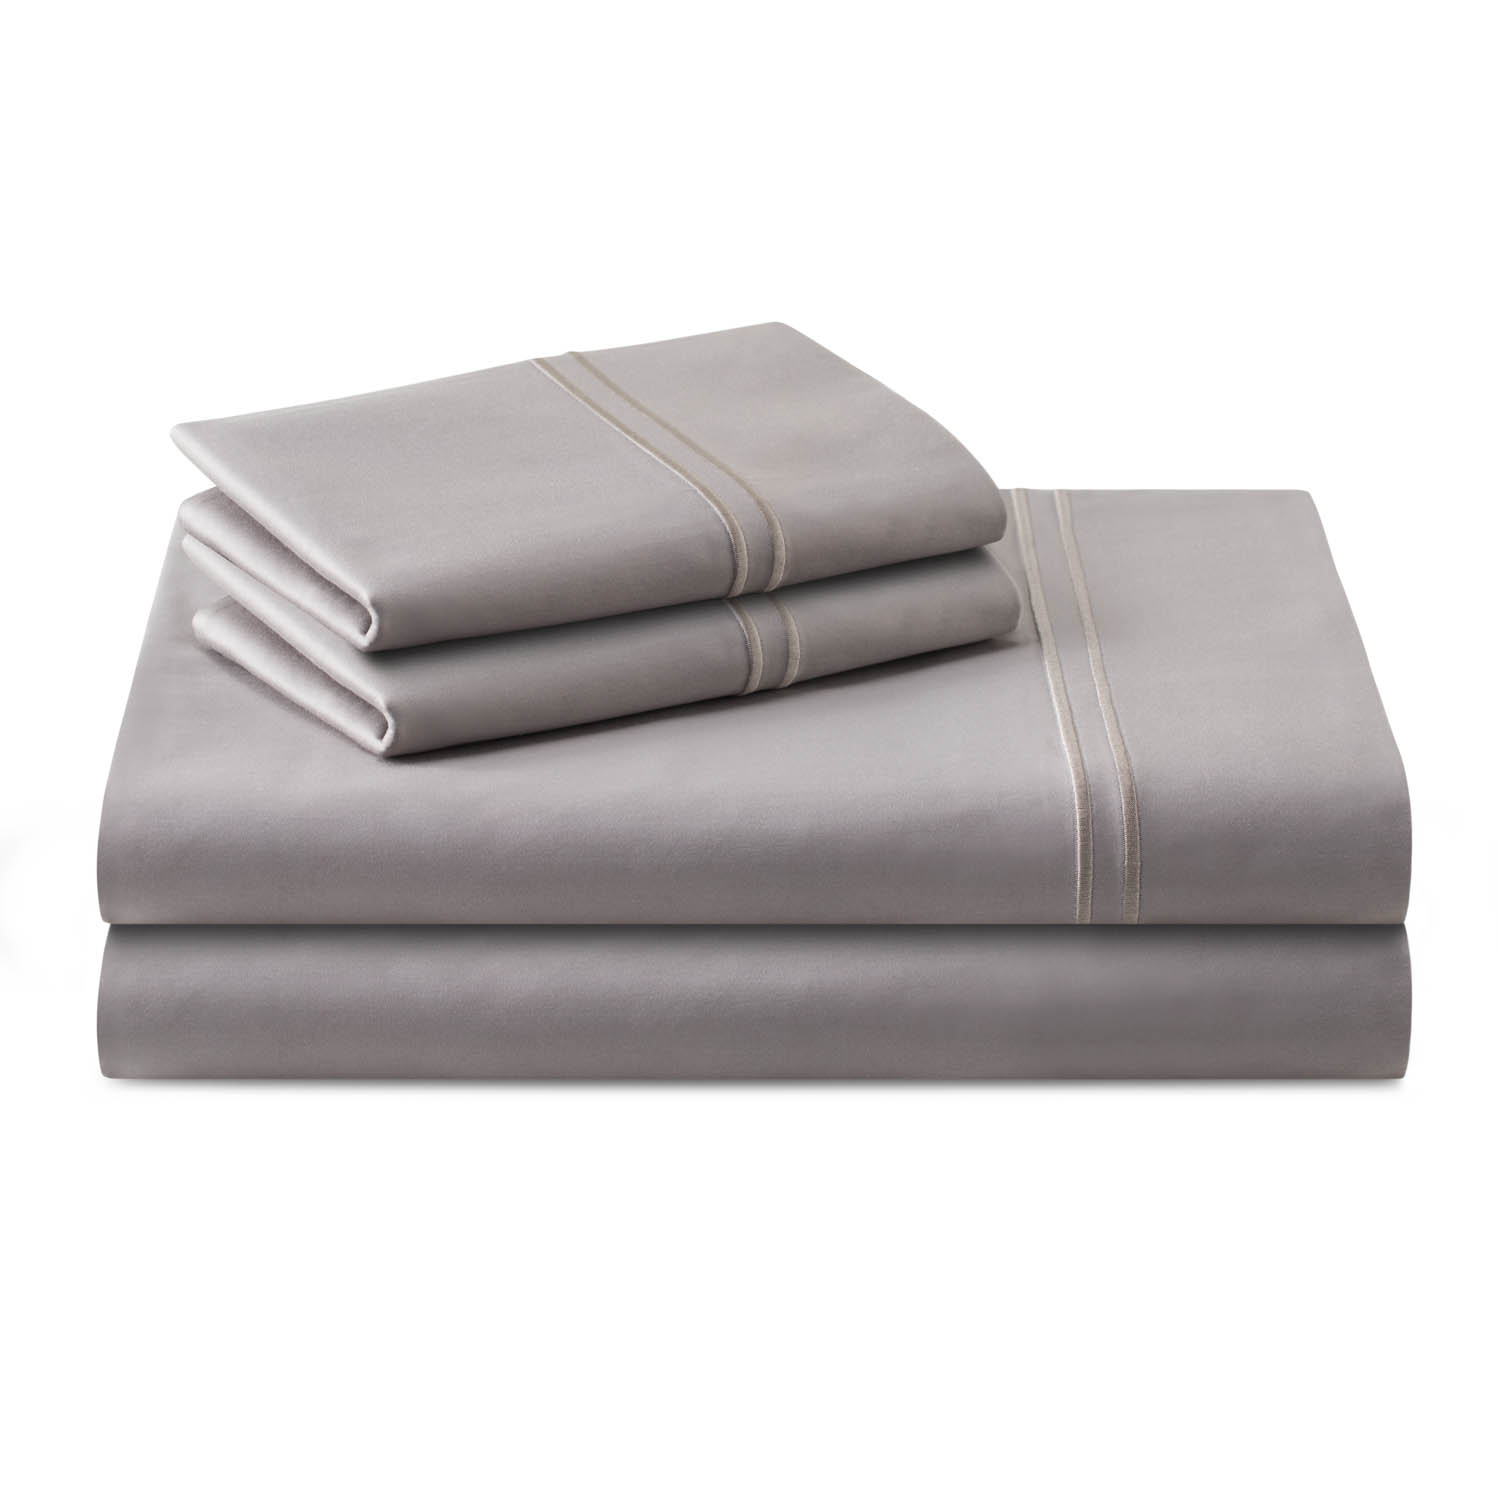 Nectar 100% Cotton Sheet Set, Softer with Every Wash